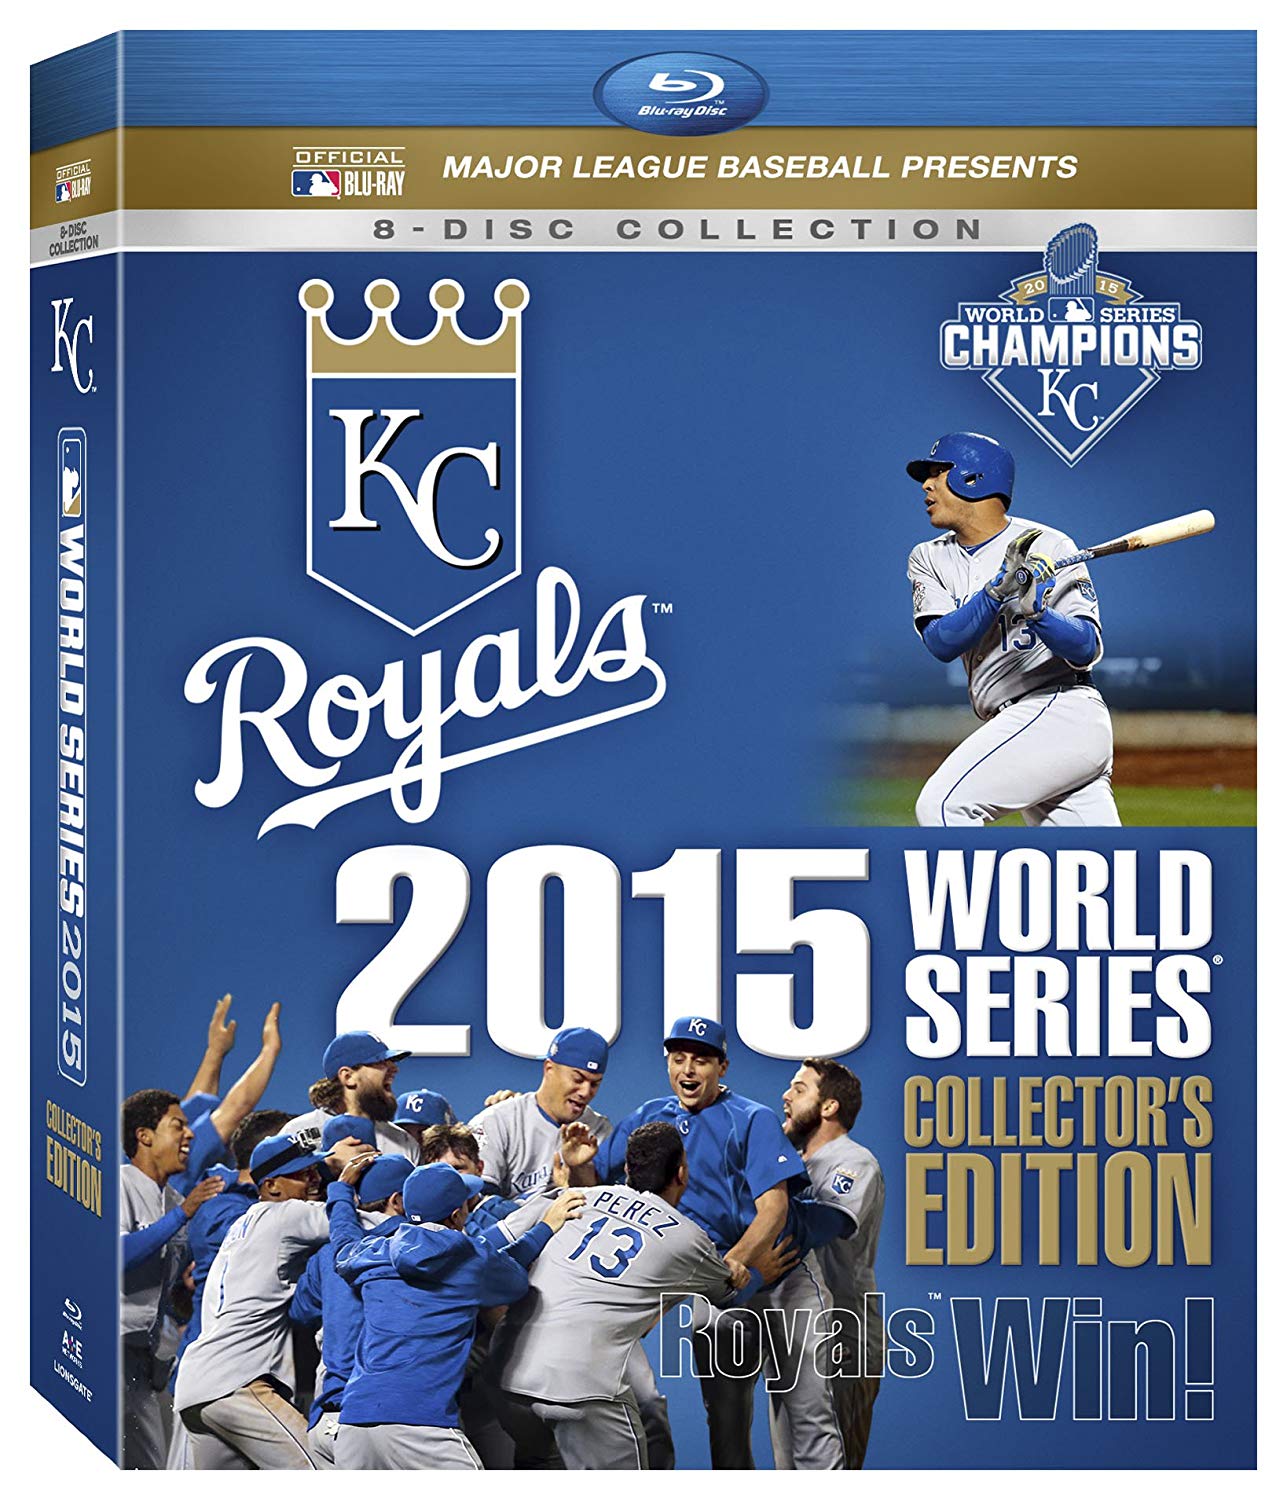 Kansas City Royals: 2015 World Series Collector's Edition (DVD) - image 2 of 2